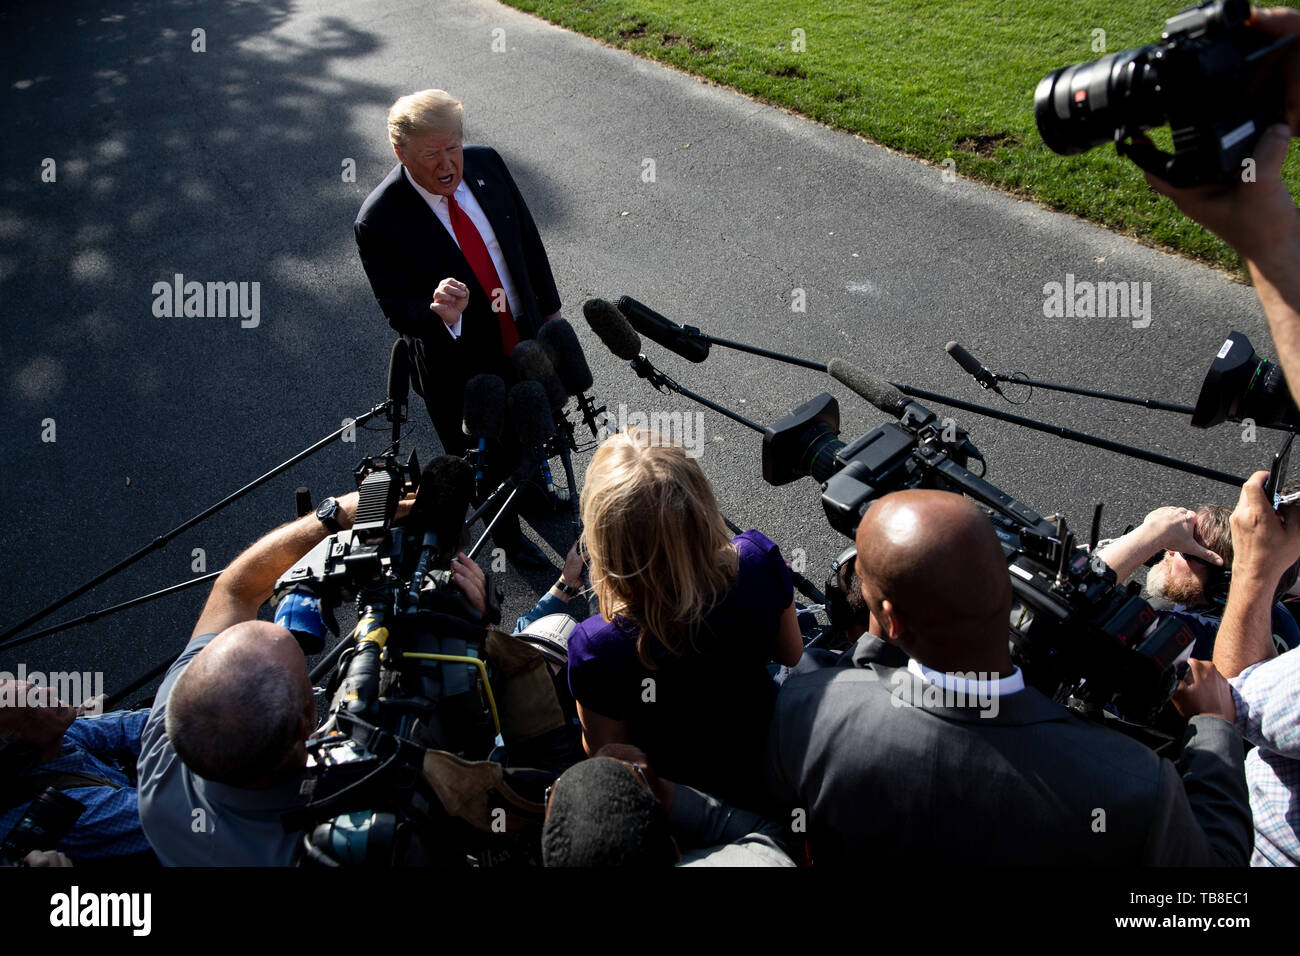 Washington, DC, USA. 30th May, 2019. U.S. President Donald Trump speaks to reporters before leaving the White House in Washington, DC, the United States, on May 30, 2019. Donald Trump slammed Special Counsel Robert Mueller as 'highly conflicted' on Thursday, one day after Mueller's first-ever public statement saying that charging Trump with a crime was 'not an option we could consider' due to Justice Department guidelines. Credit: Ting Shen/Xinhua/Alamy Live News Stock Photo